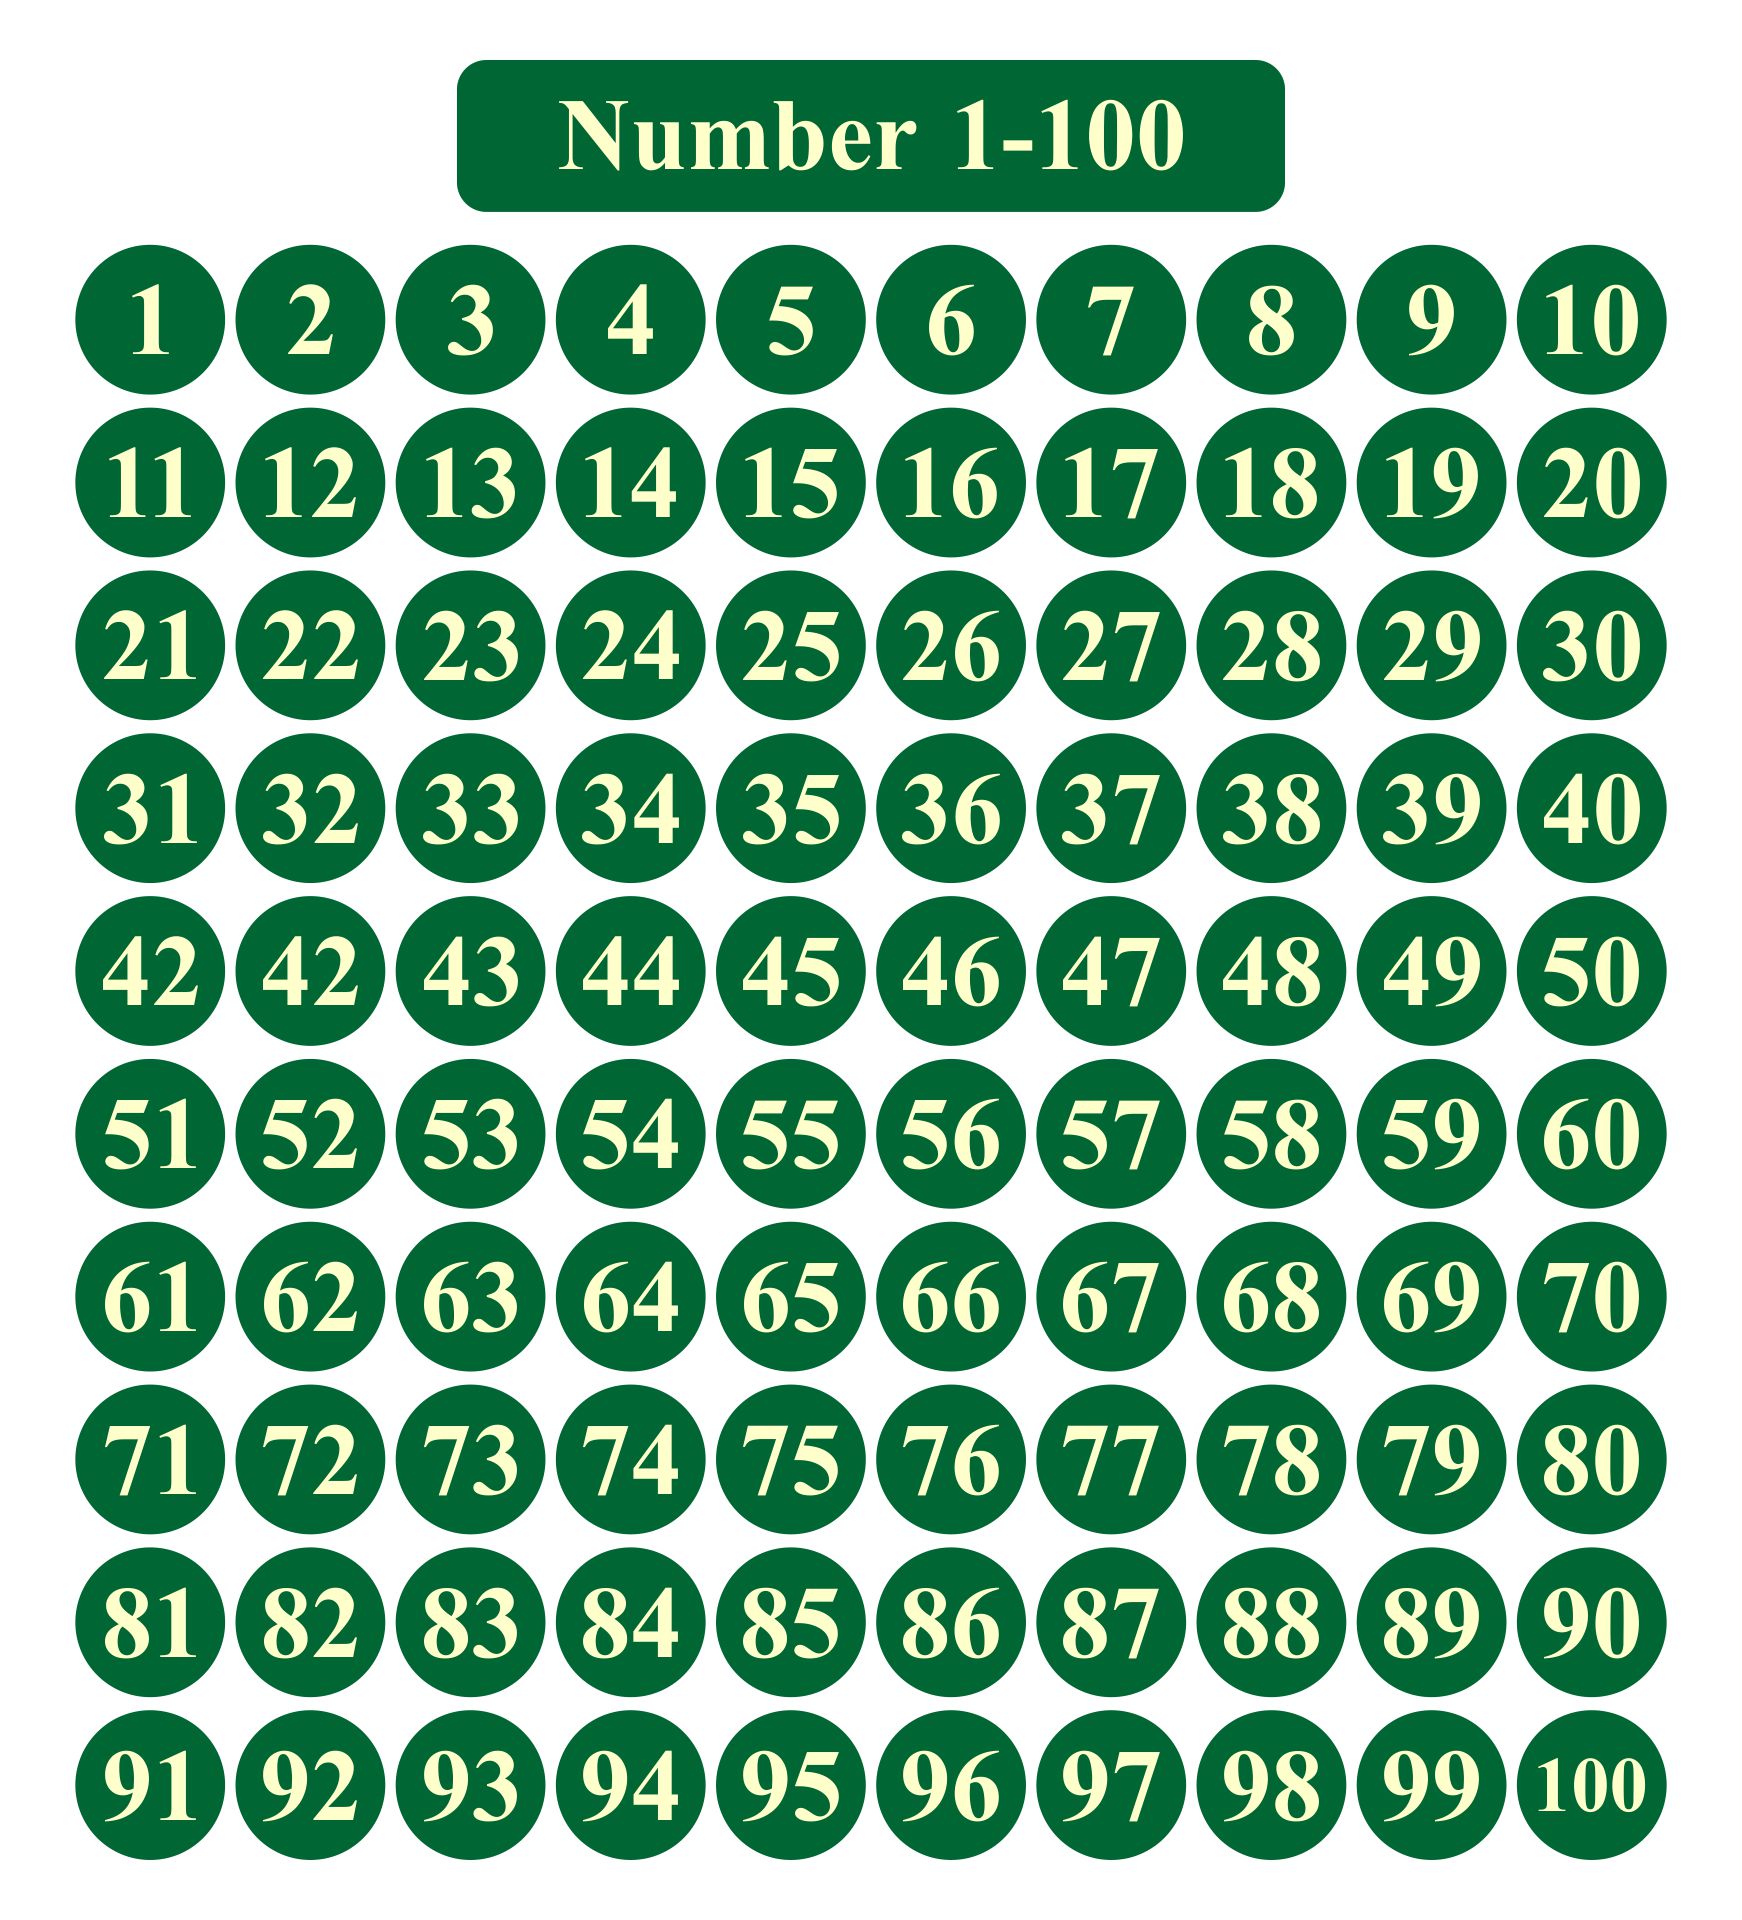 7-best-images-of-number-cards-1-100-printable-number-cards-1-20